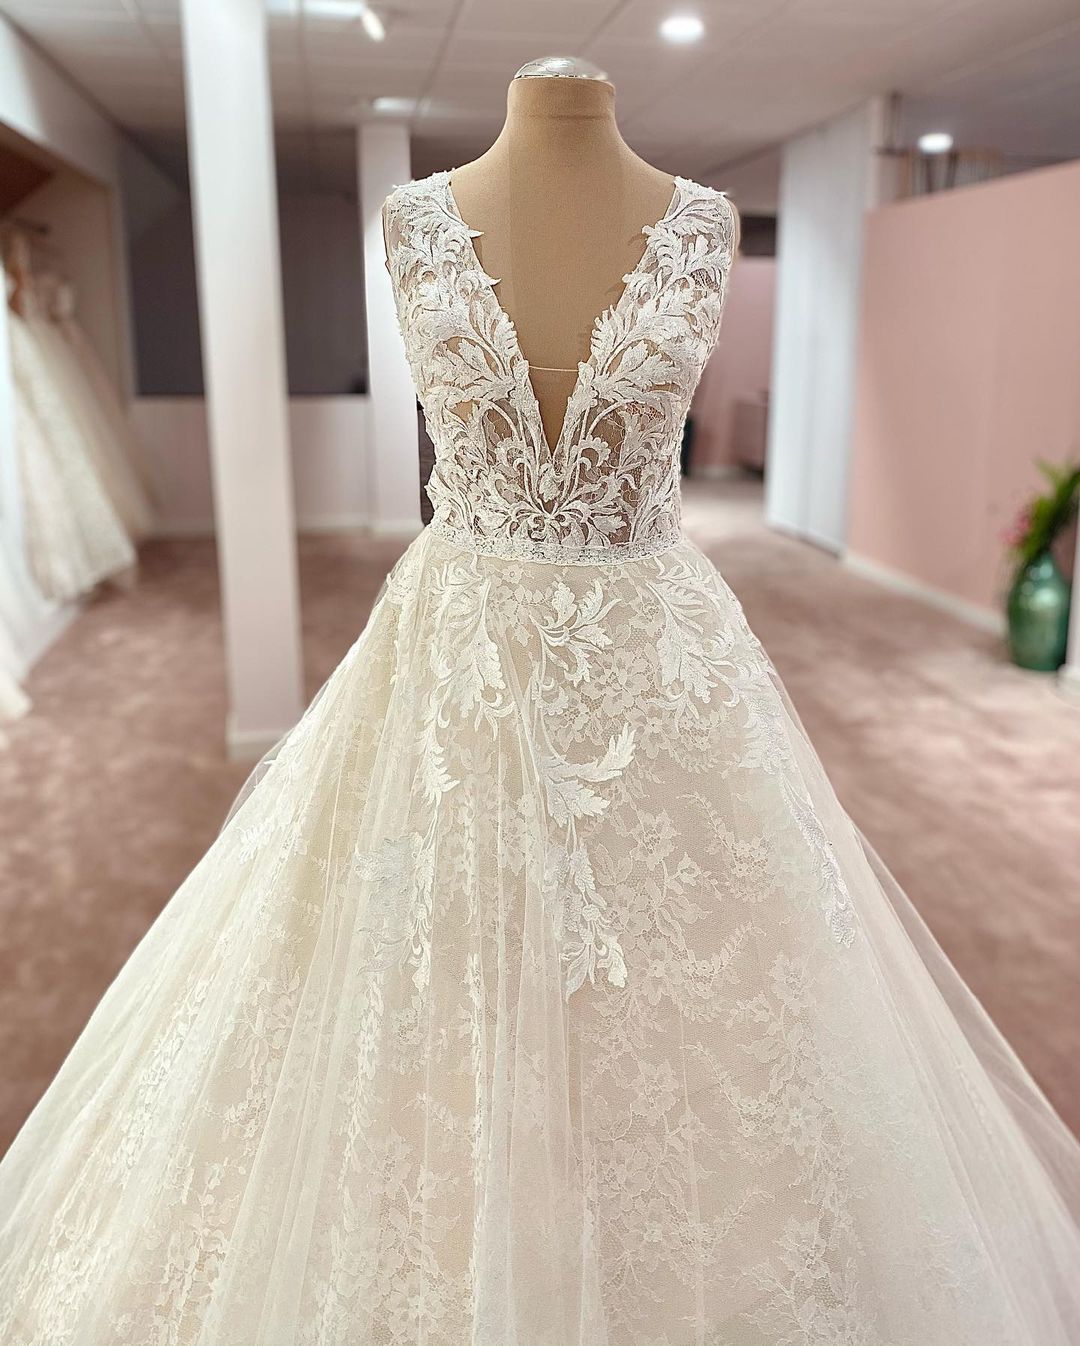 Elegant A-Line Wedding Dress with Appliques and Lace Tulle Detail-Wedding Dresses-BallBride